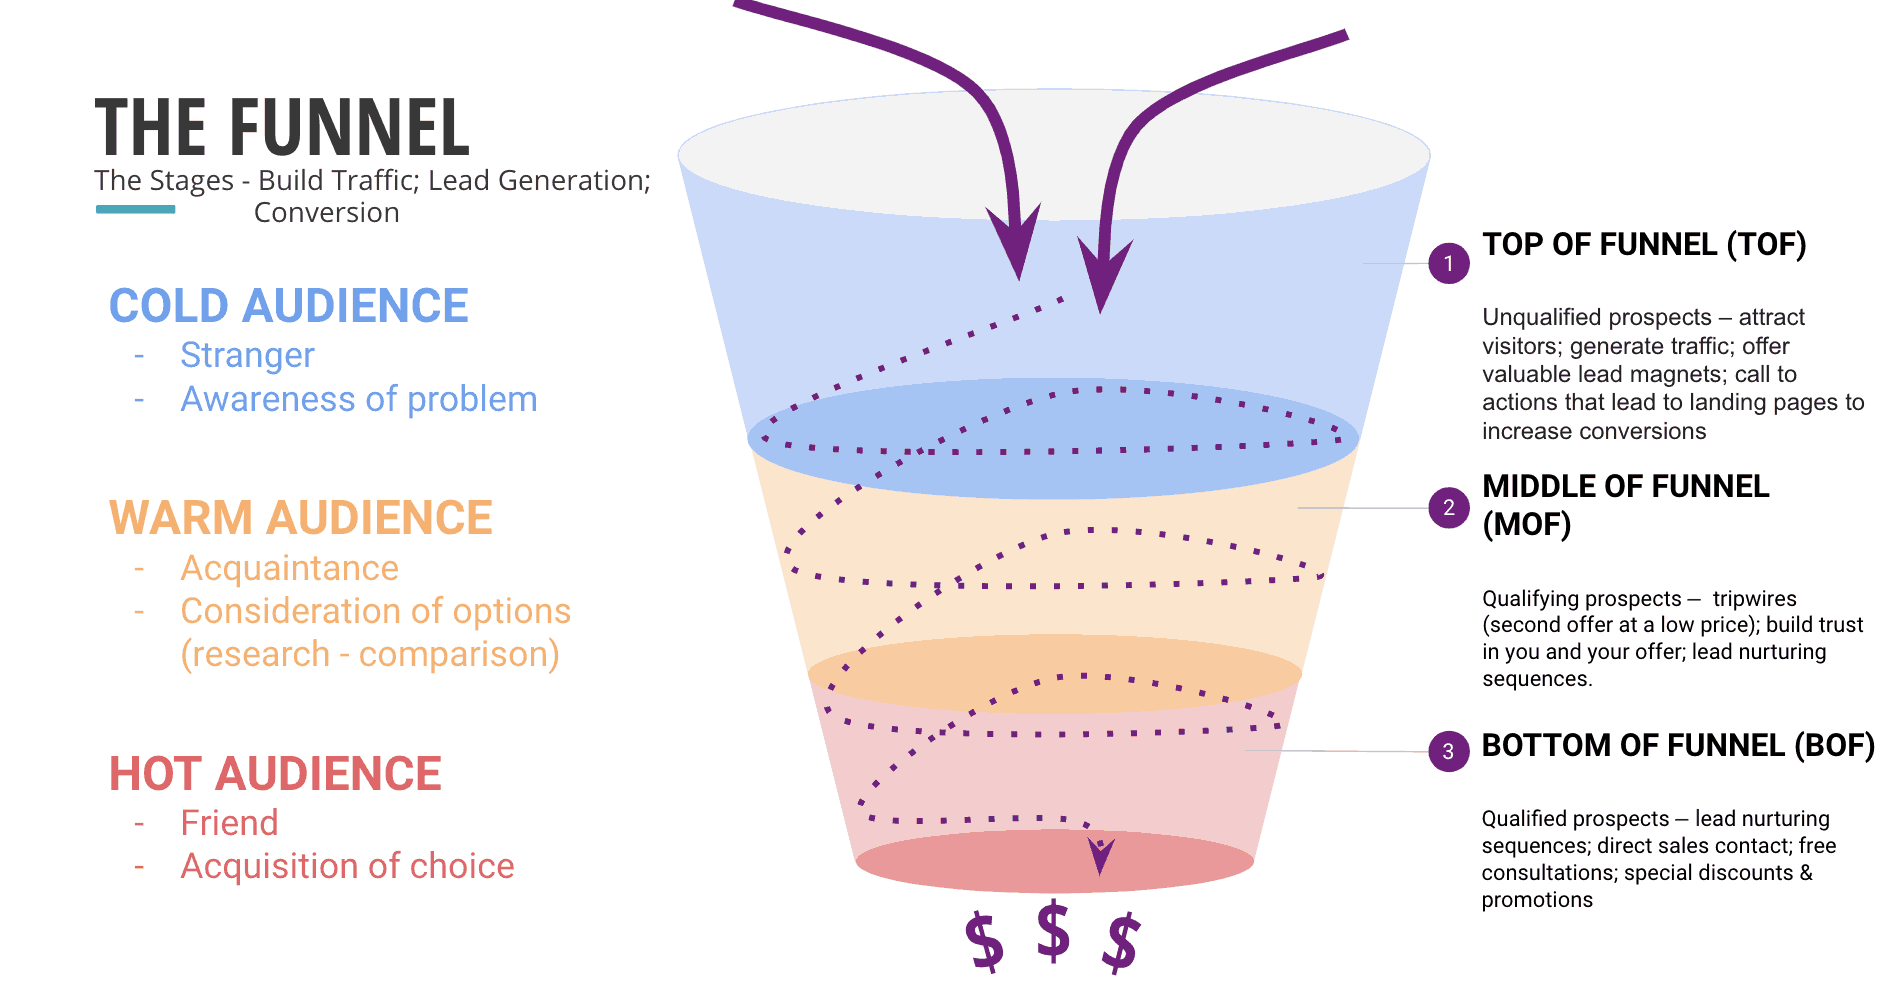 ¿Qué es Middle Of The Funnel?